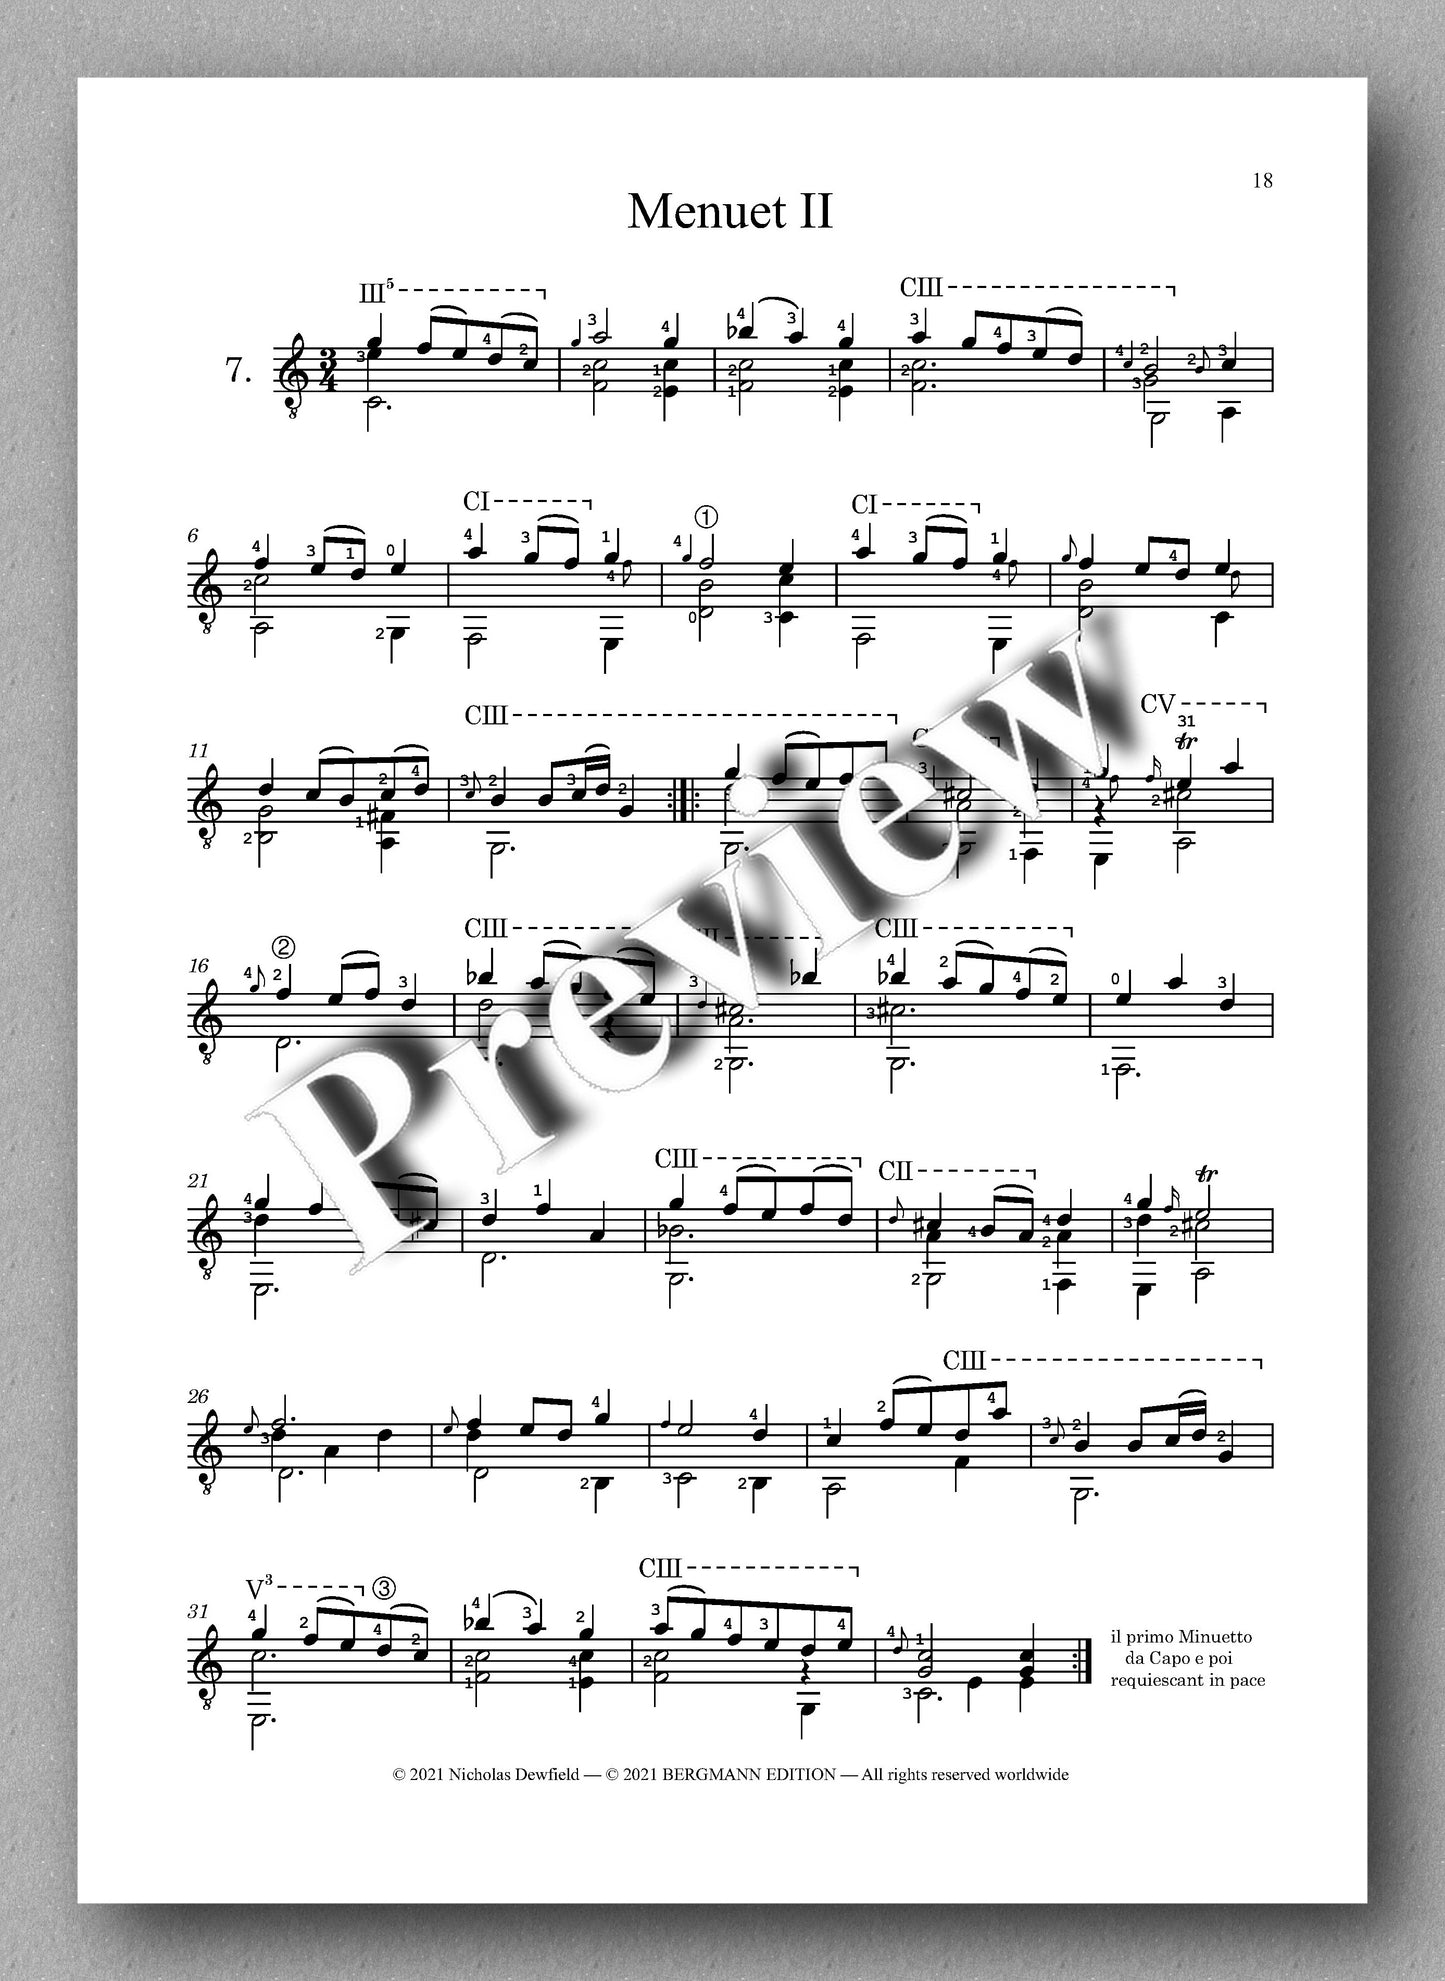 Weiss-Dewfield, Sonata No. 3 - preview of music score 7